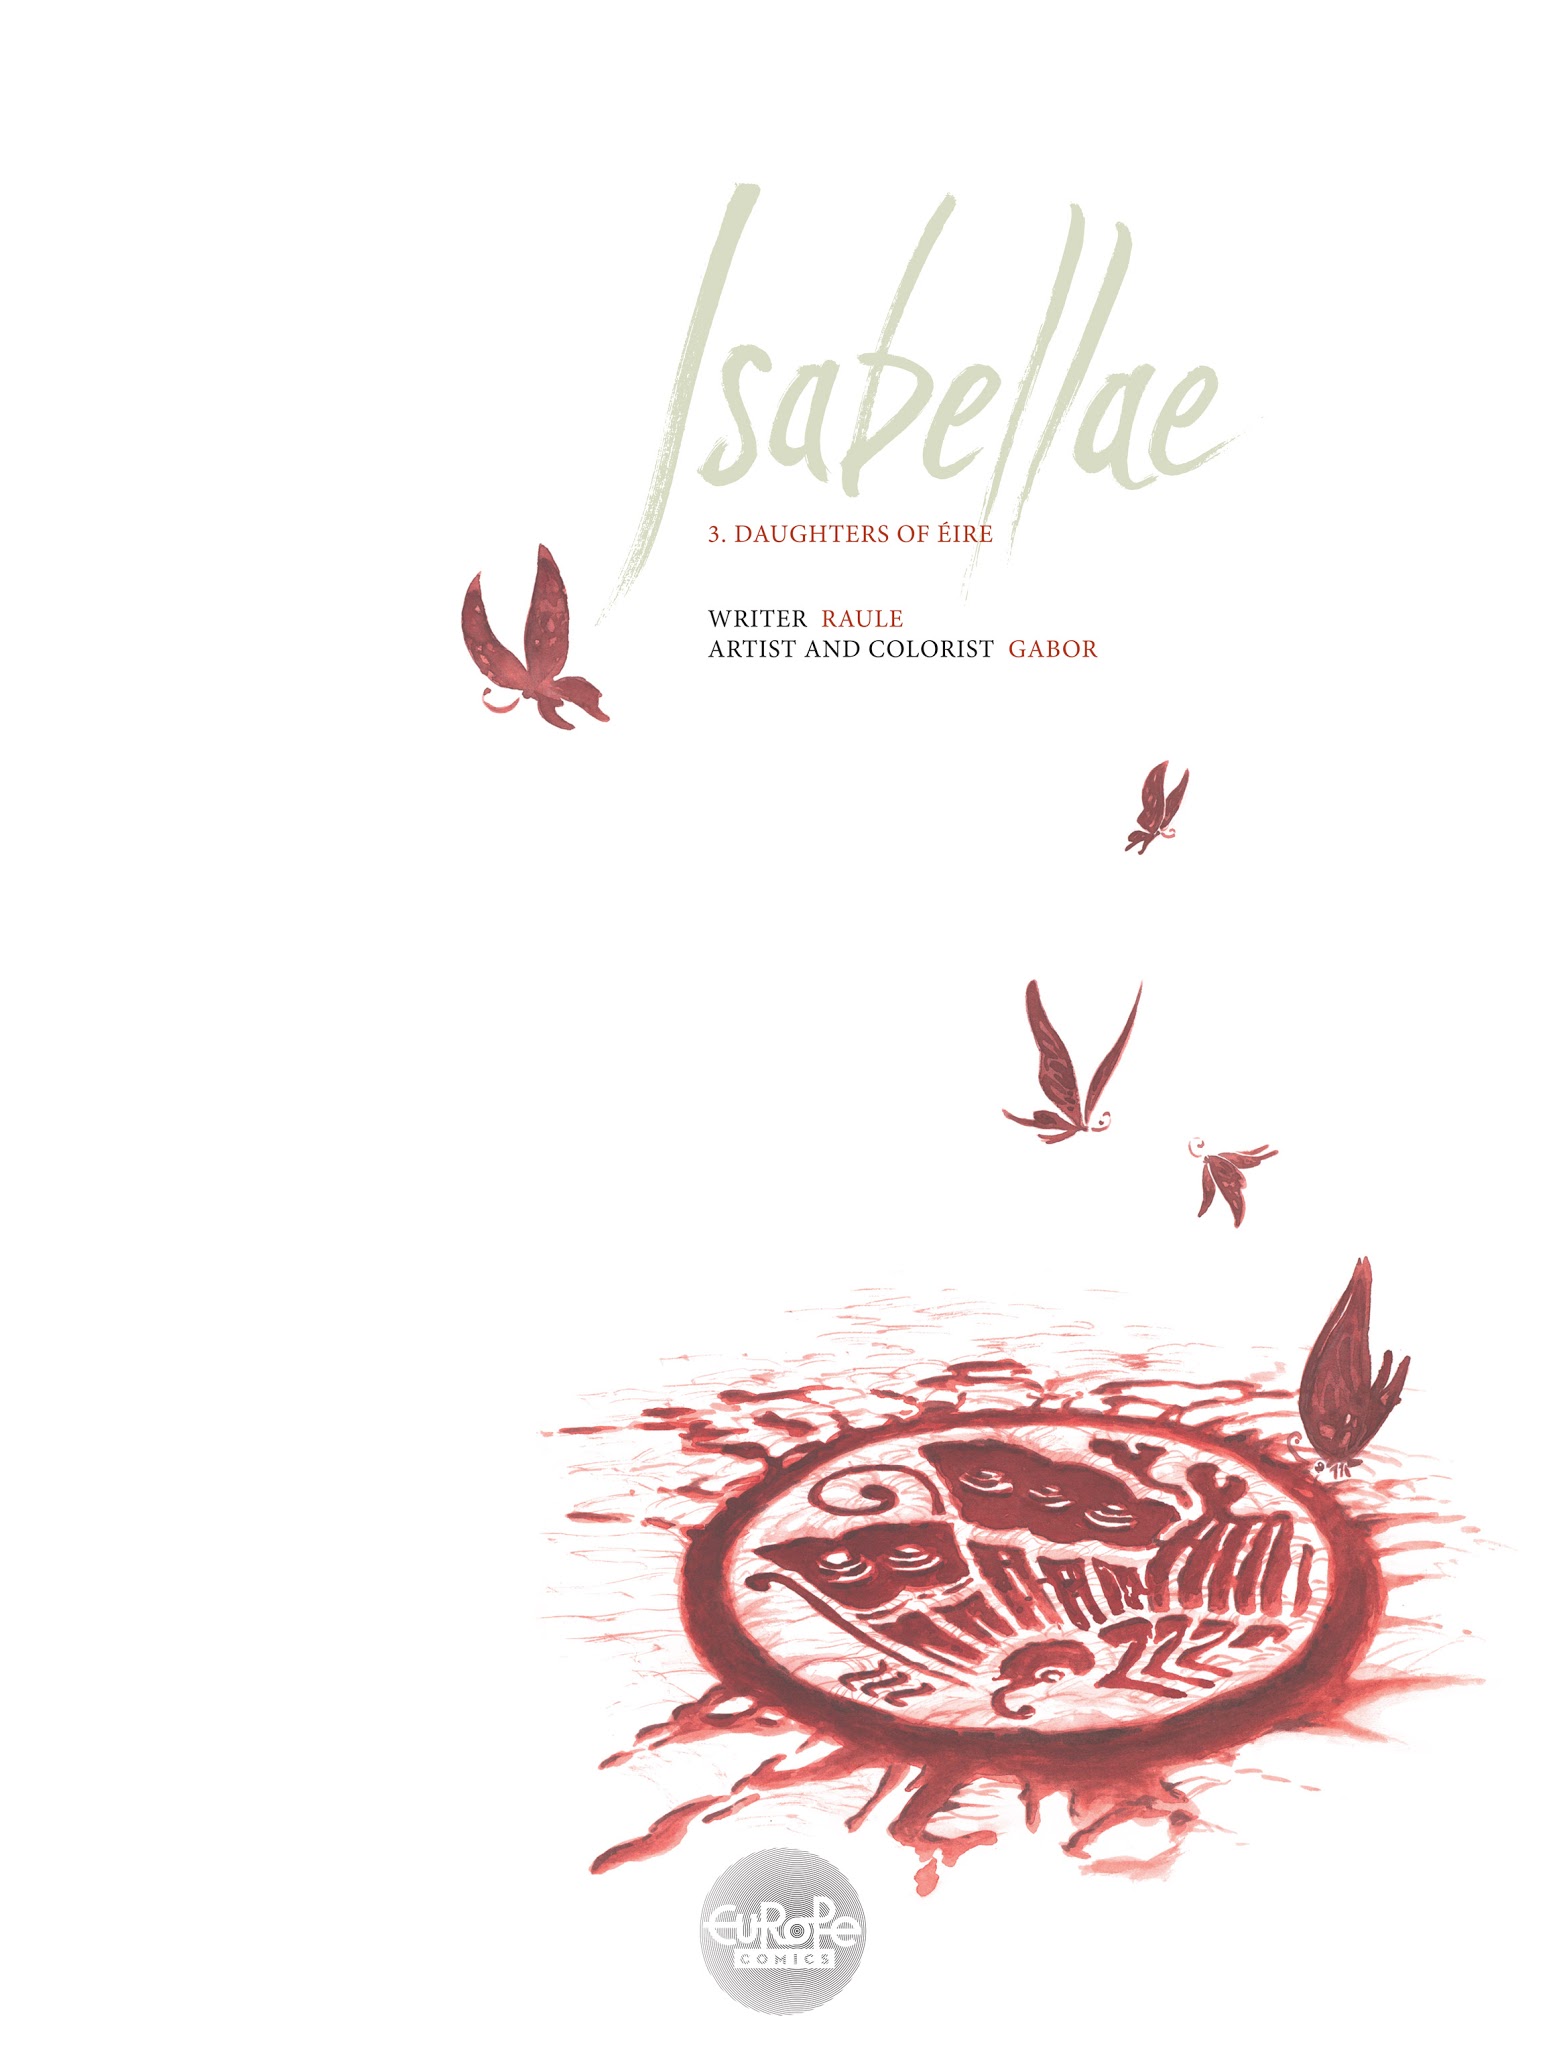 Read online Isabellae comic -  Issue #3 - 3